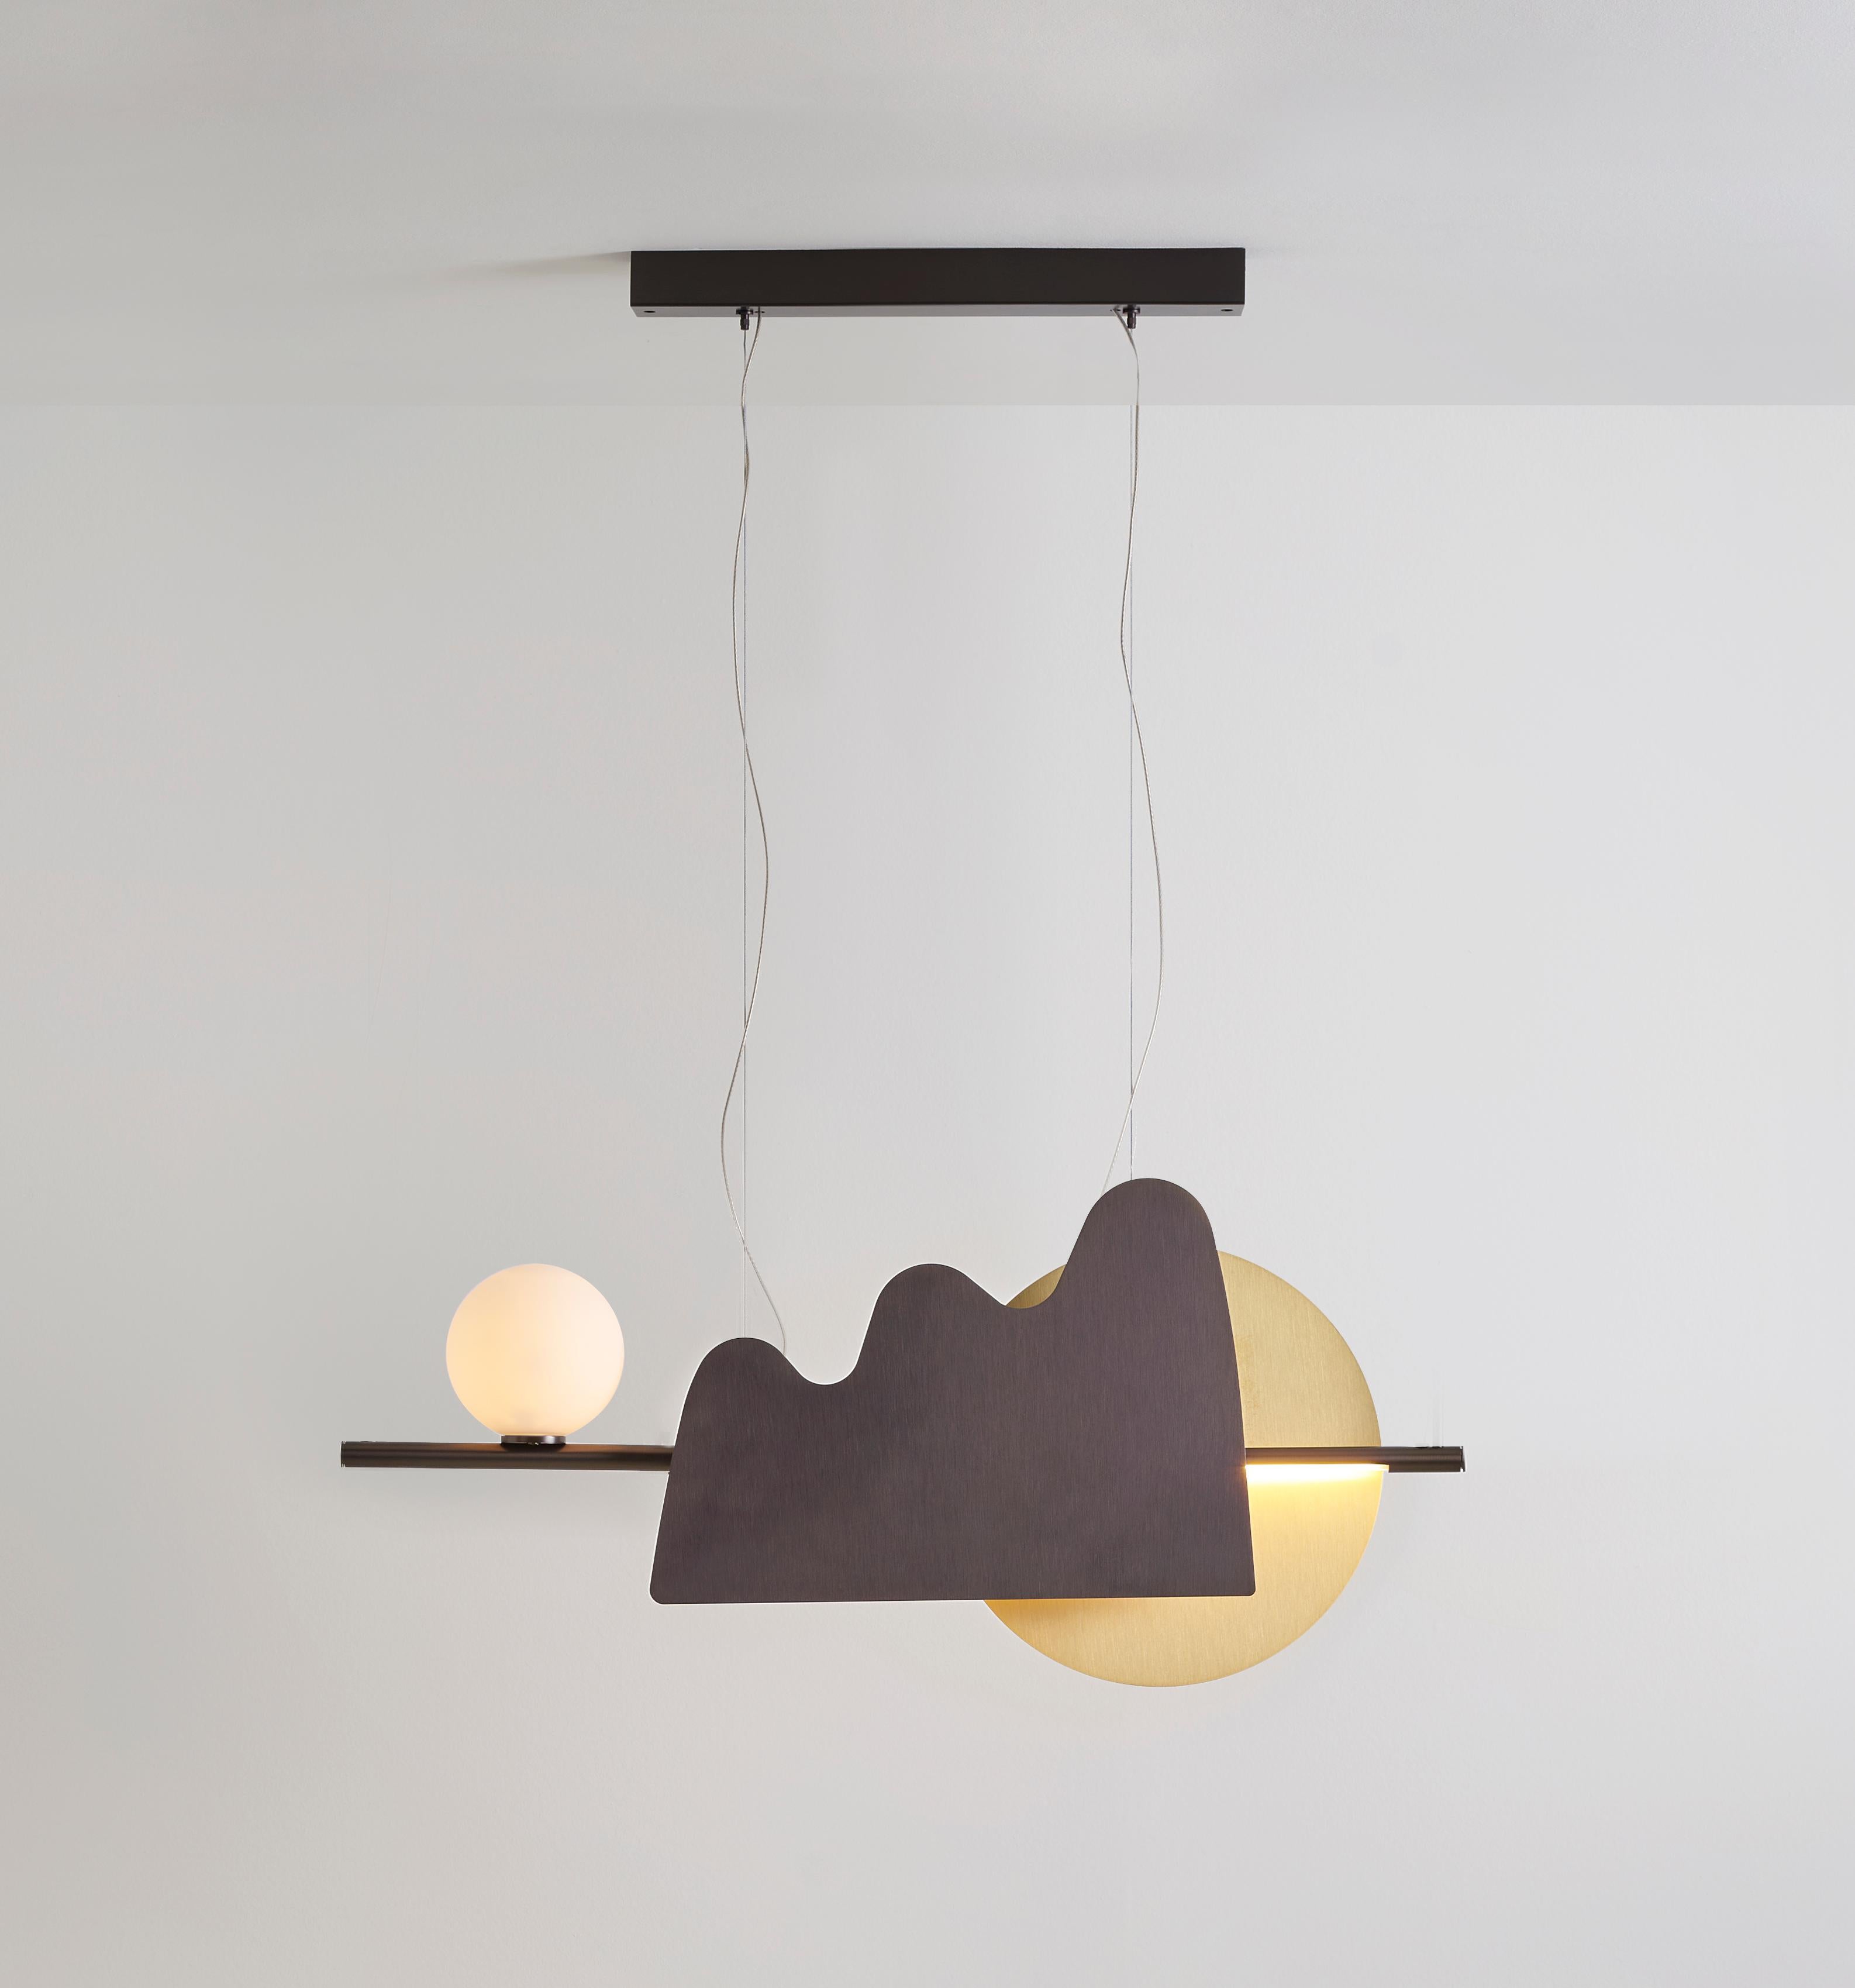 Nacho pendant by Sylvain Willenz
Dimensions: D 12 x W 130 X H 45 cm
Materials: Solid Brass, Polycarbonate, opal glass
Others finishes and dimensions are available. The height of the cables can be adjusted during installation

All our lamps can